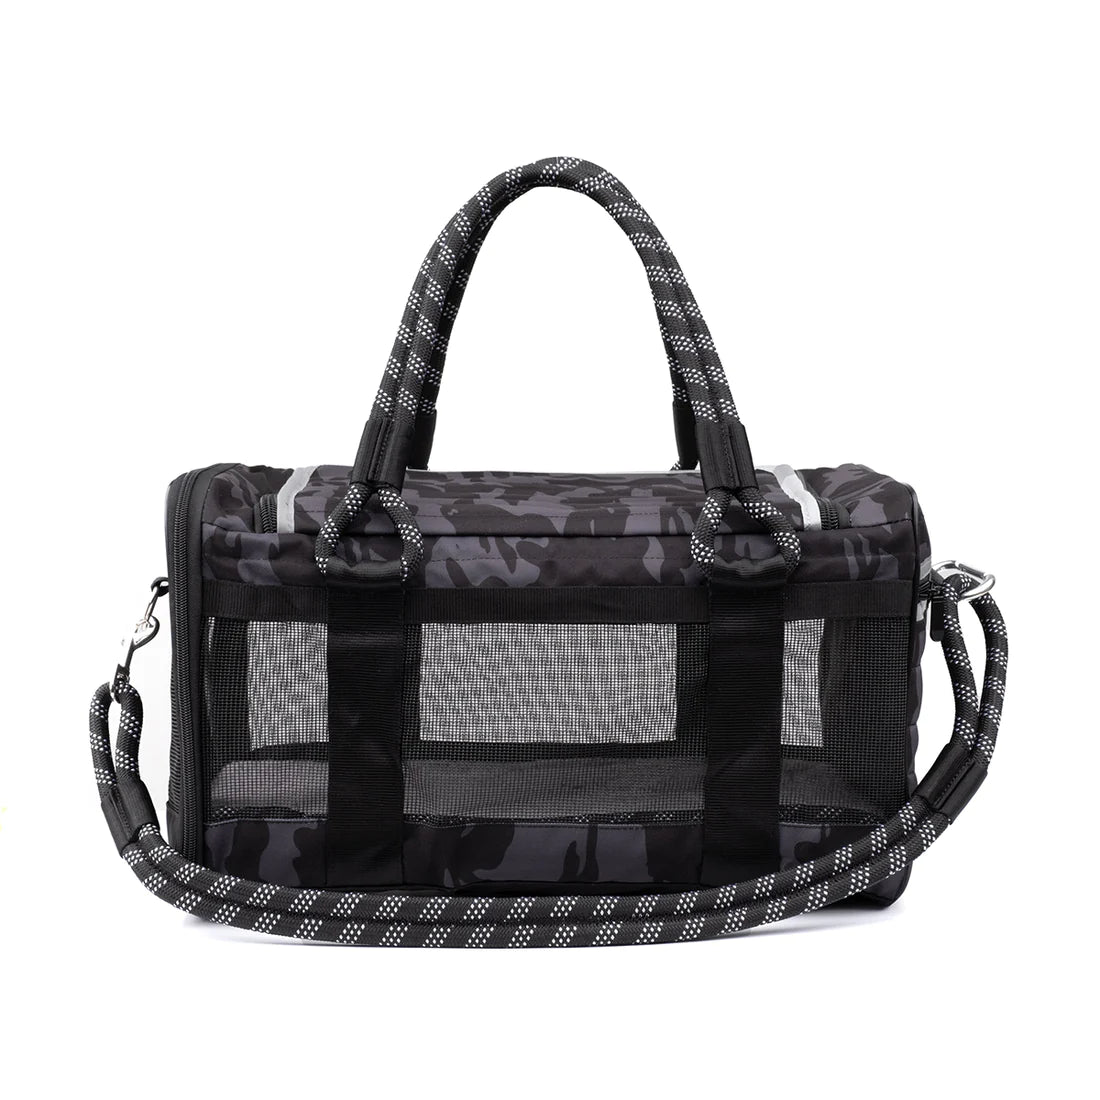 Out-of-Office Pet Carrier - Black Camo/Black